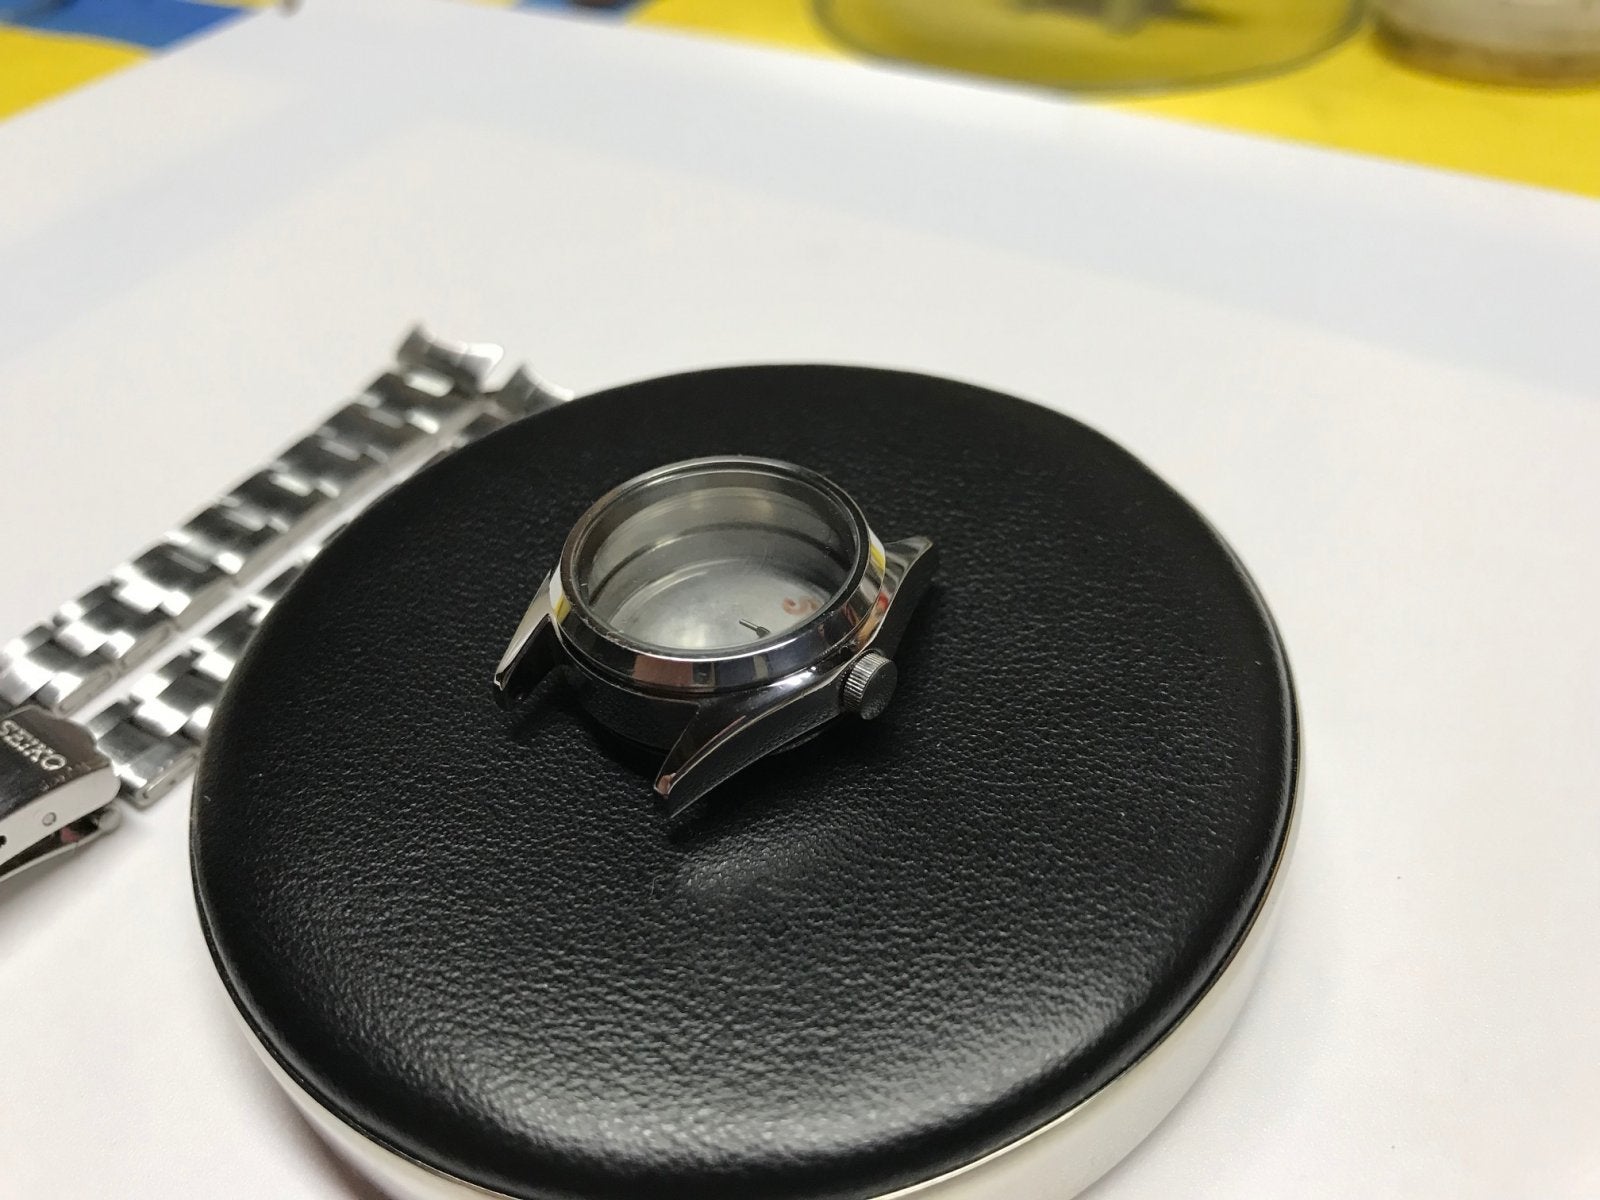 Project Restoration/Build - 1988 Seiko 4206-0332 | The Watch Site